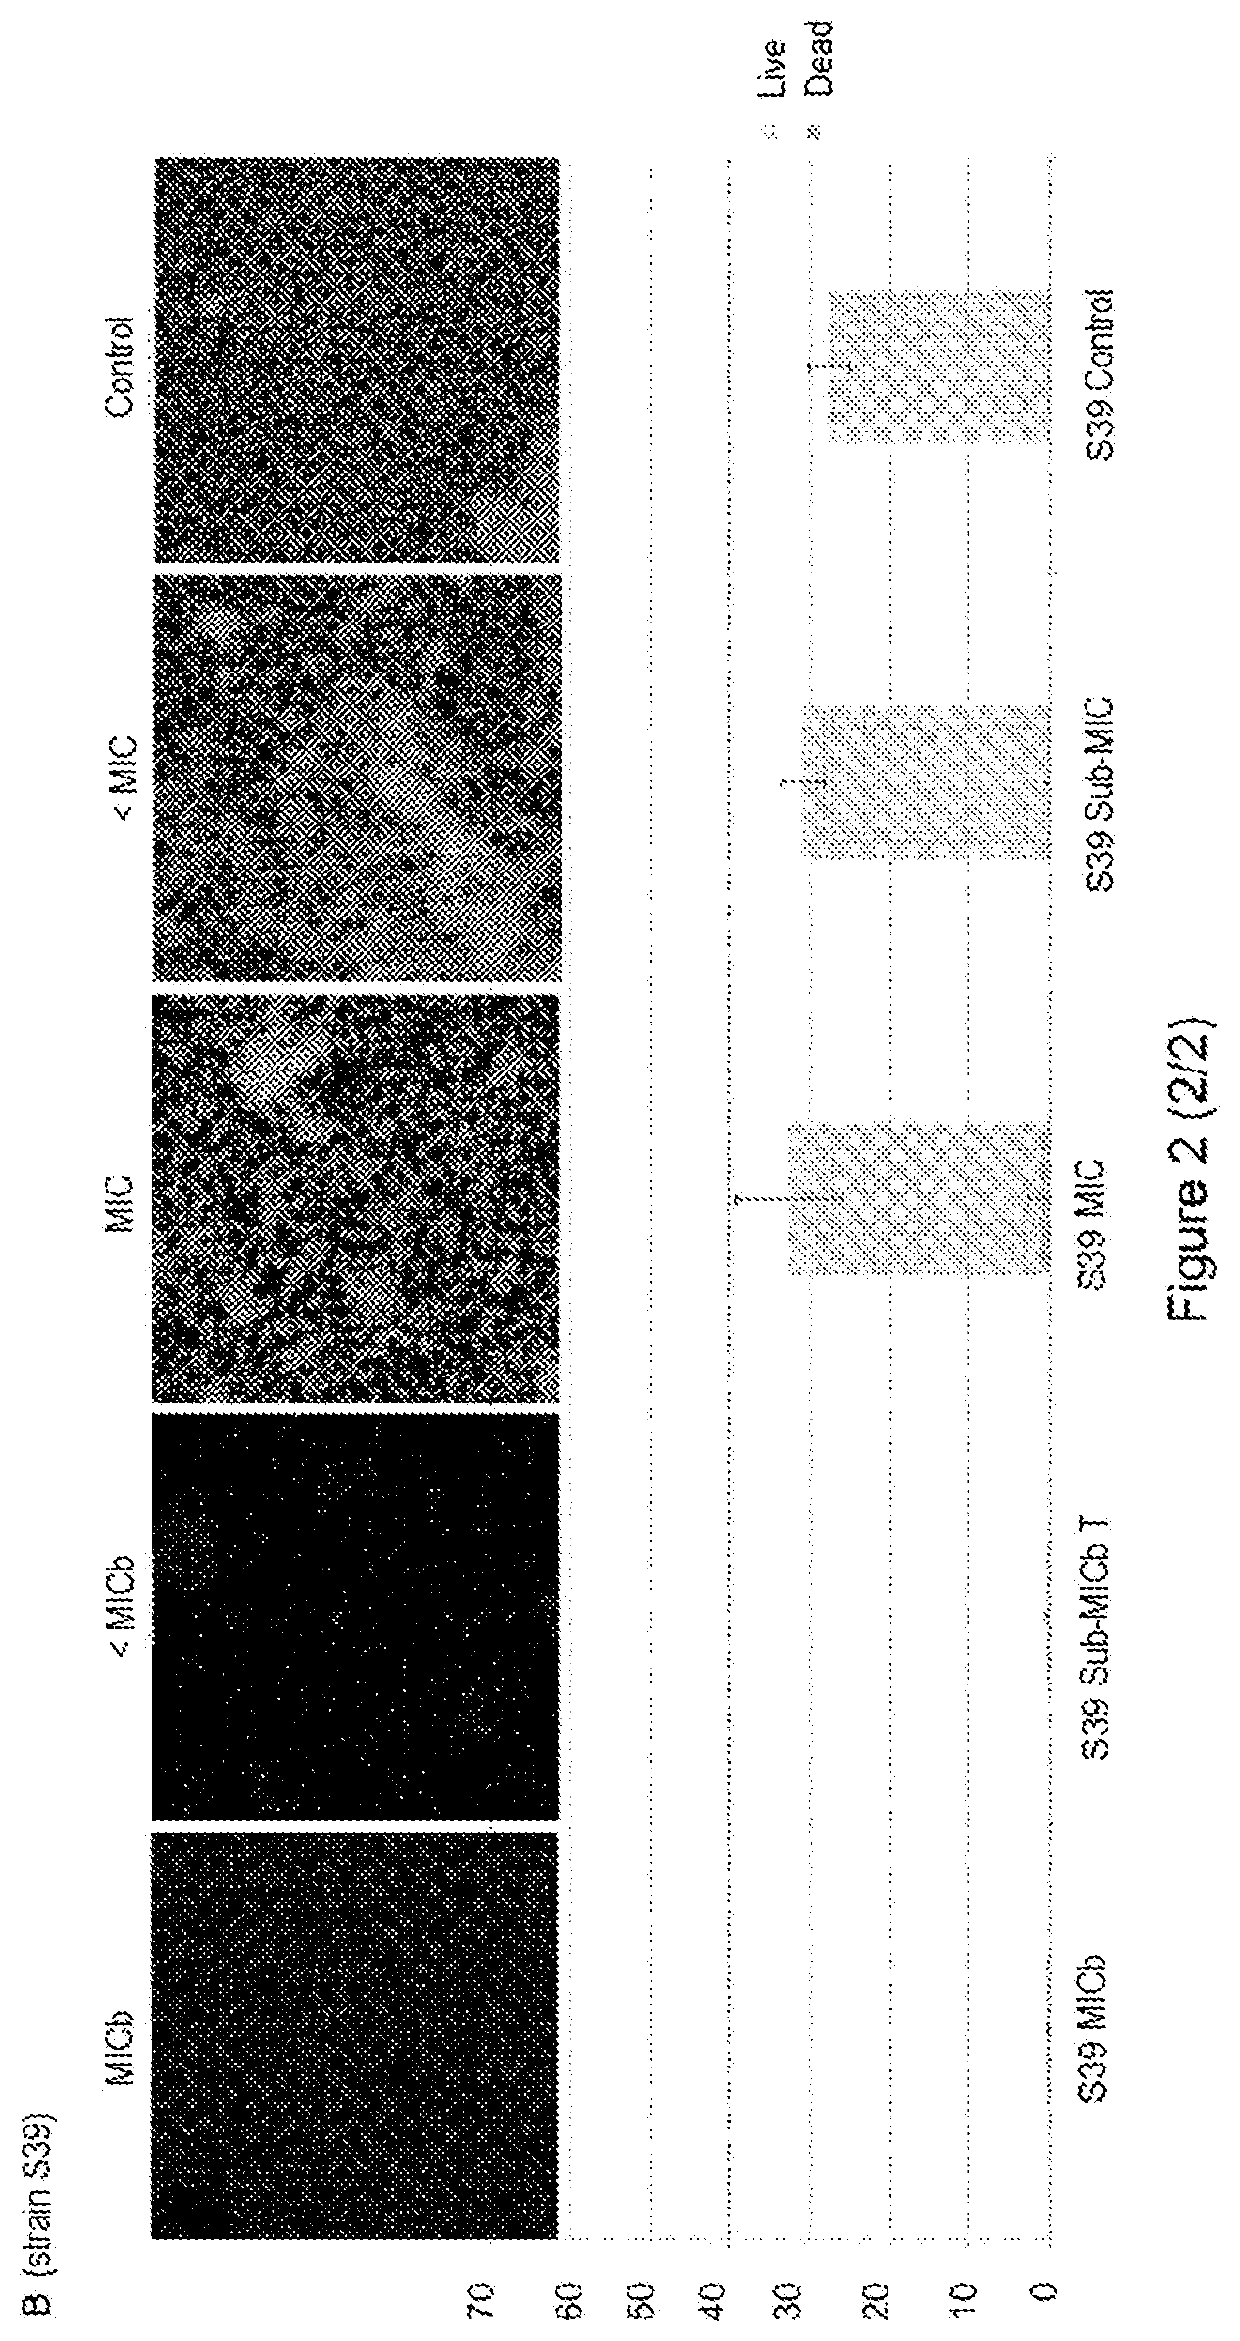 Use of cloxacillin to inhibit/prevent biofilm formation